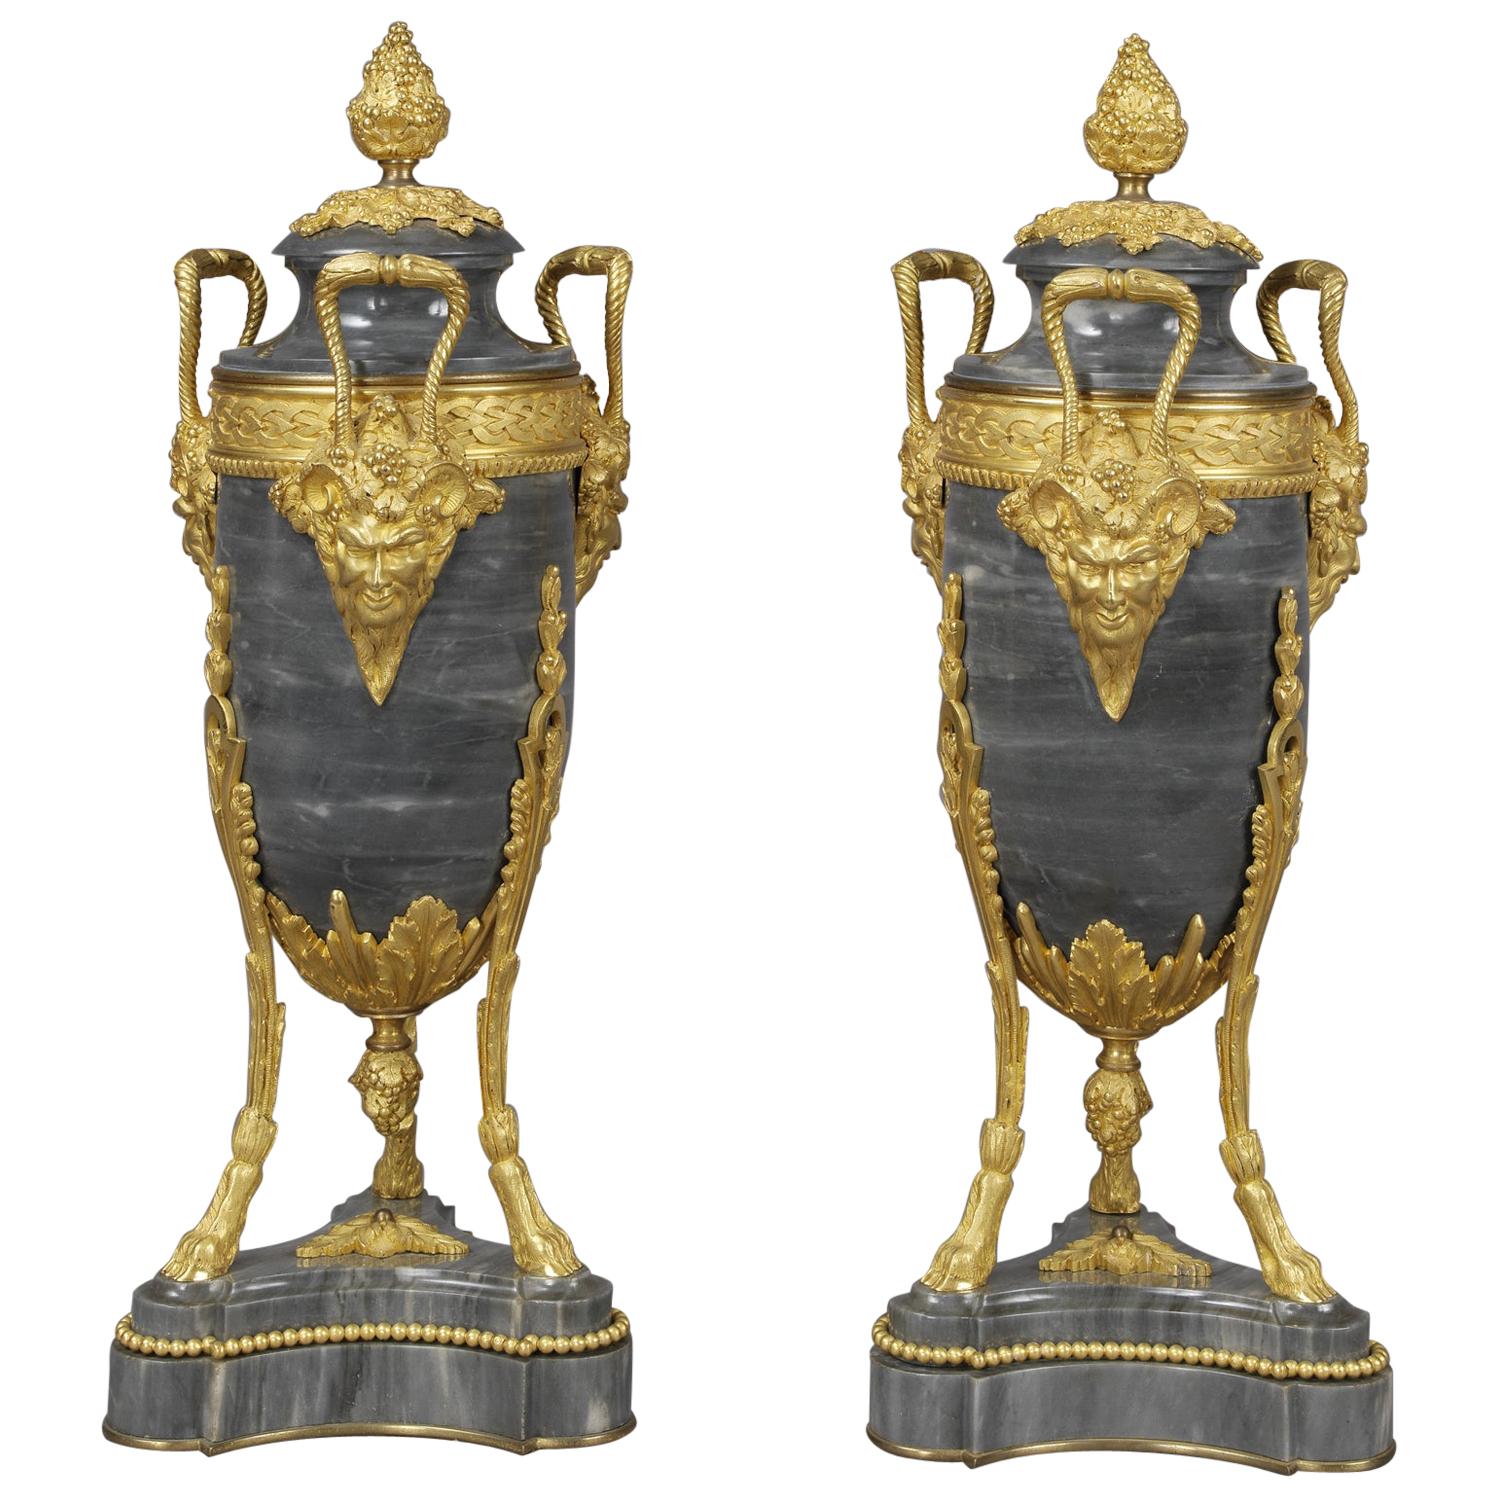 Pair of Louis XVI Style Marble Urns Attributed to Maxime Secrétant, circa 1890